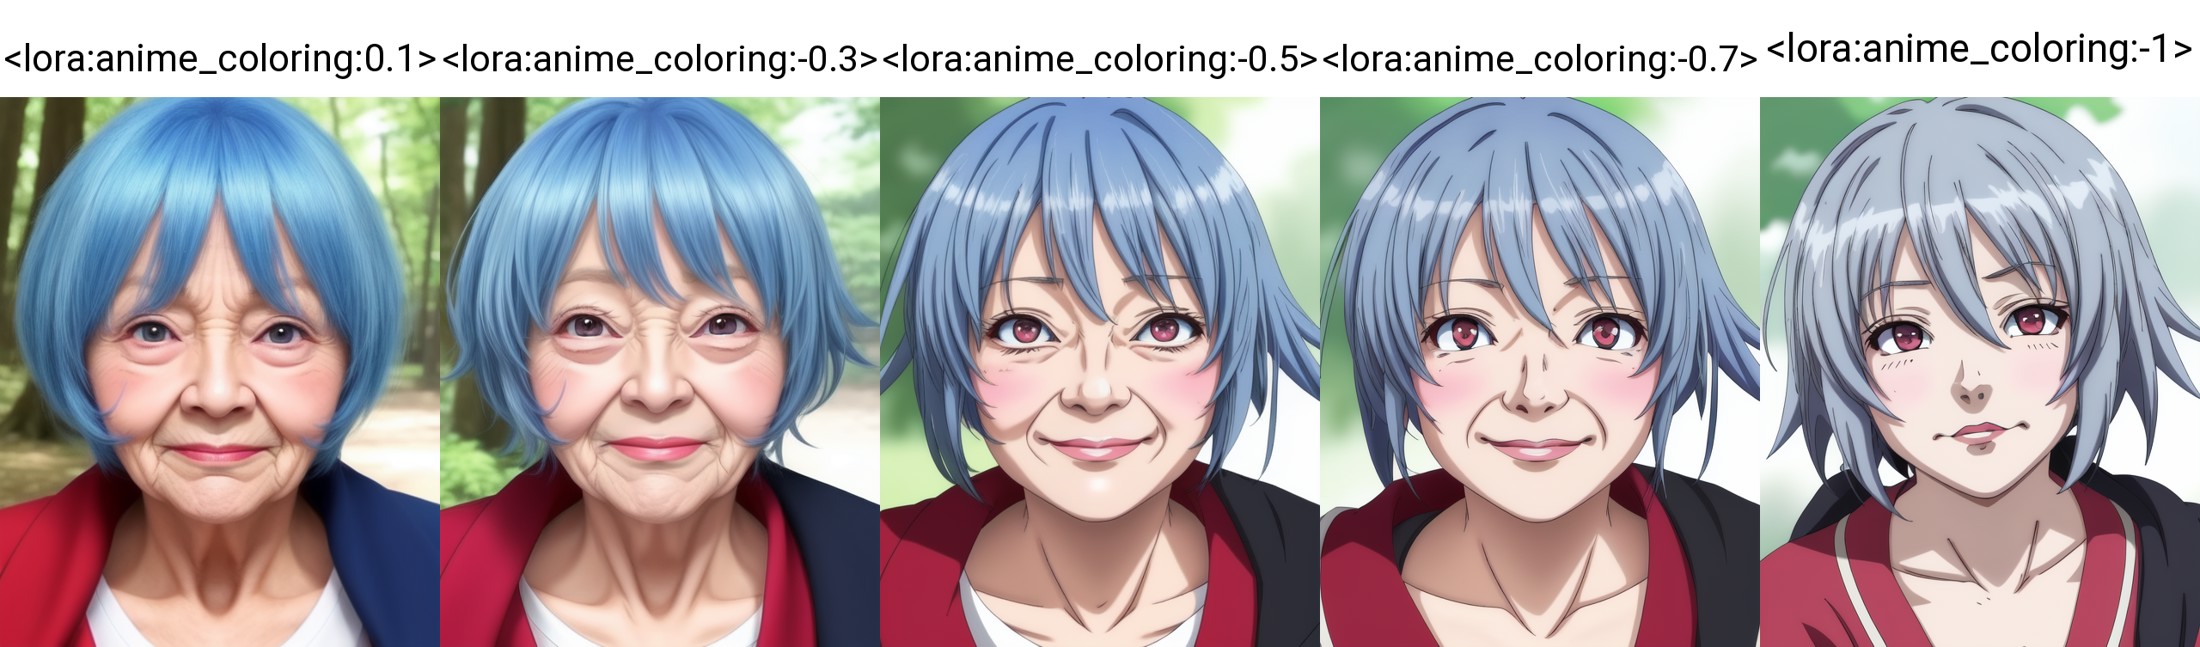 <lora:anime_coloring:0.1>, 1woman, 96 years old, nasolabial folds, Wrinkle, (anime_coloring:1.1), face focus, blue hair, r...